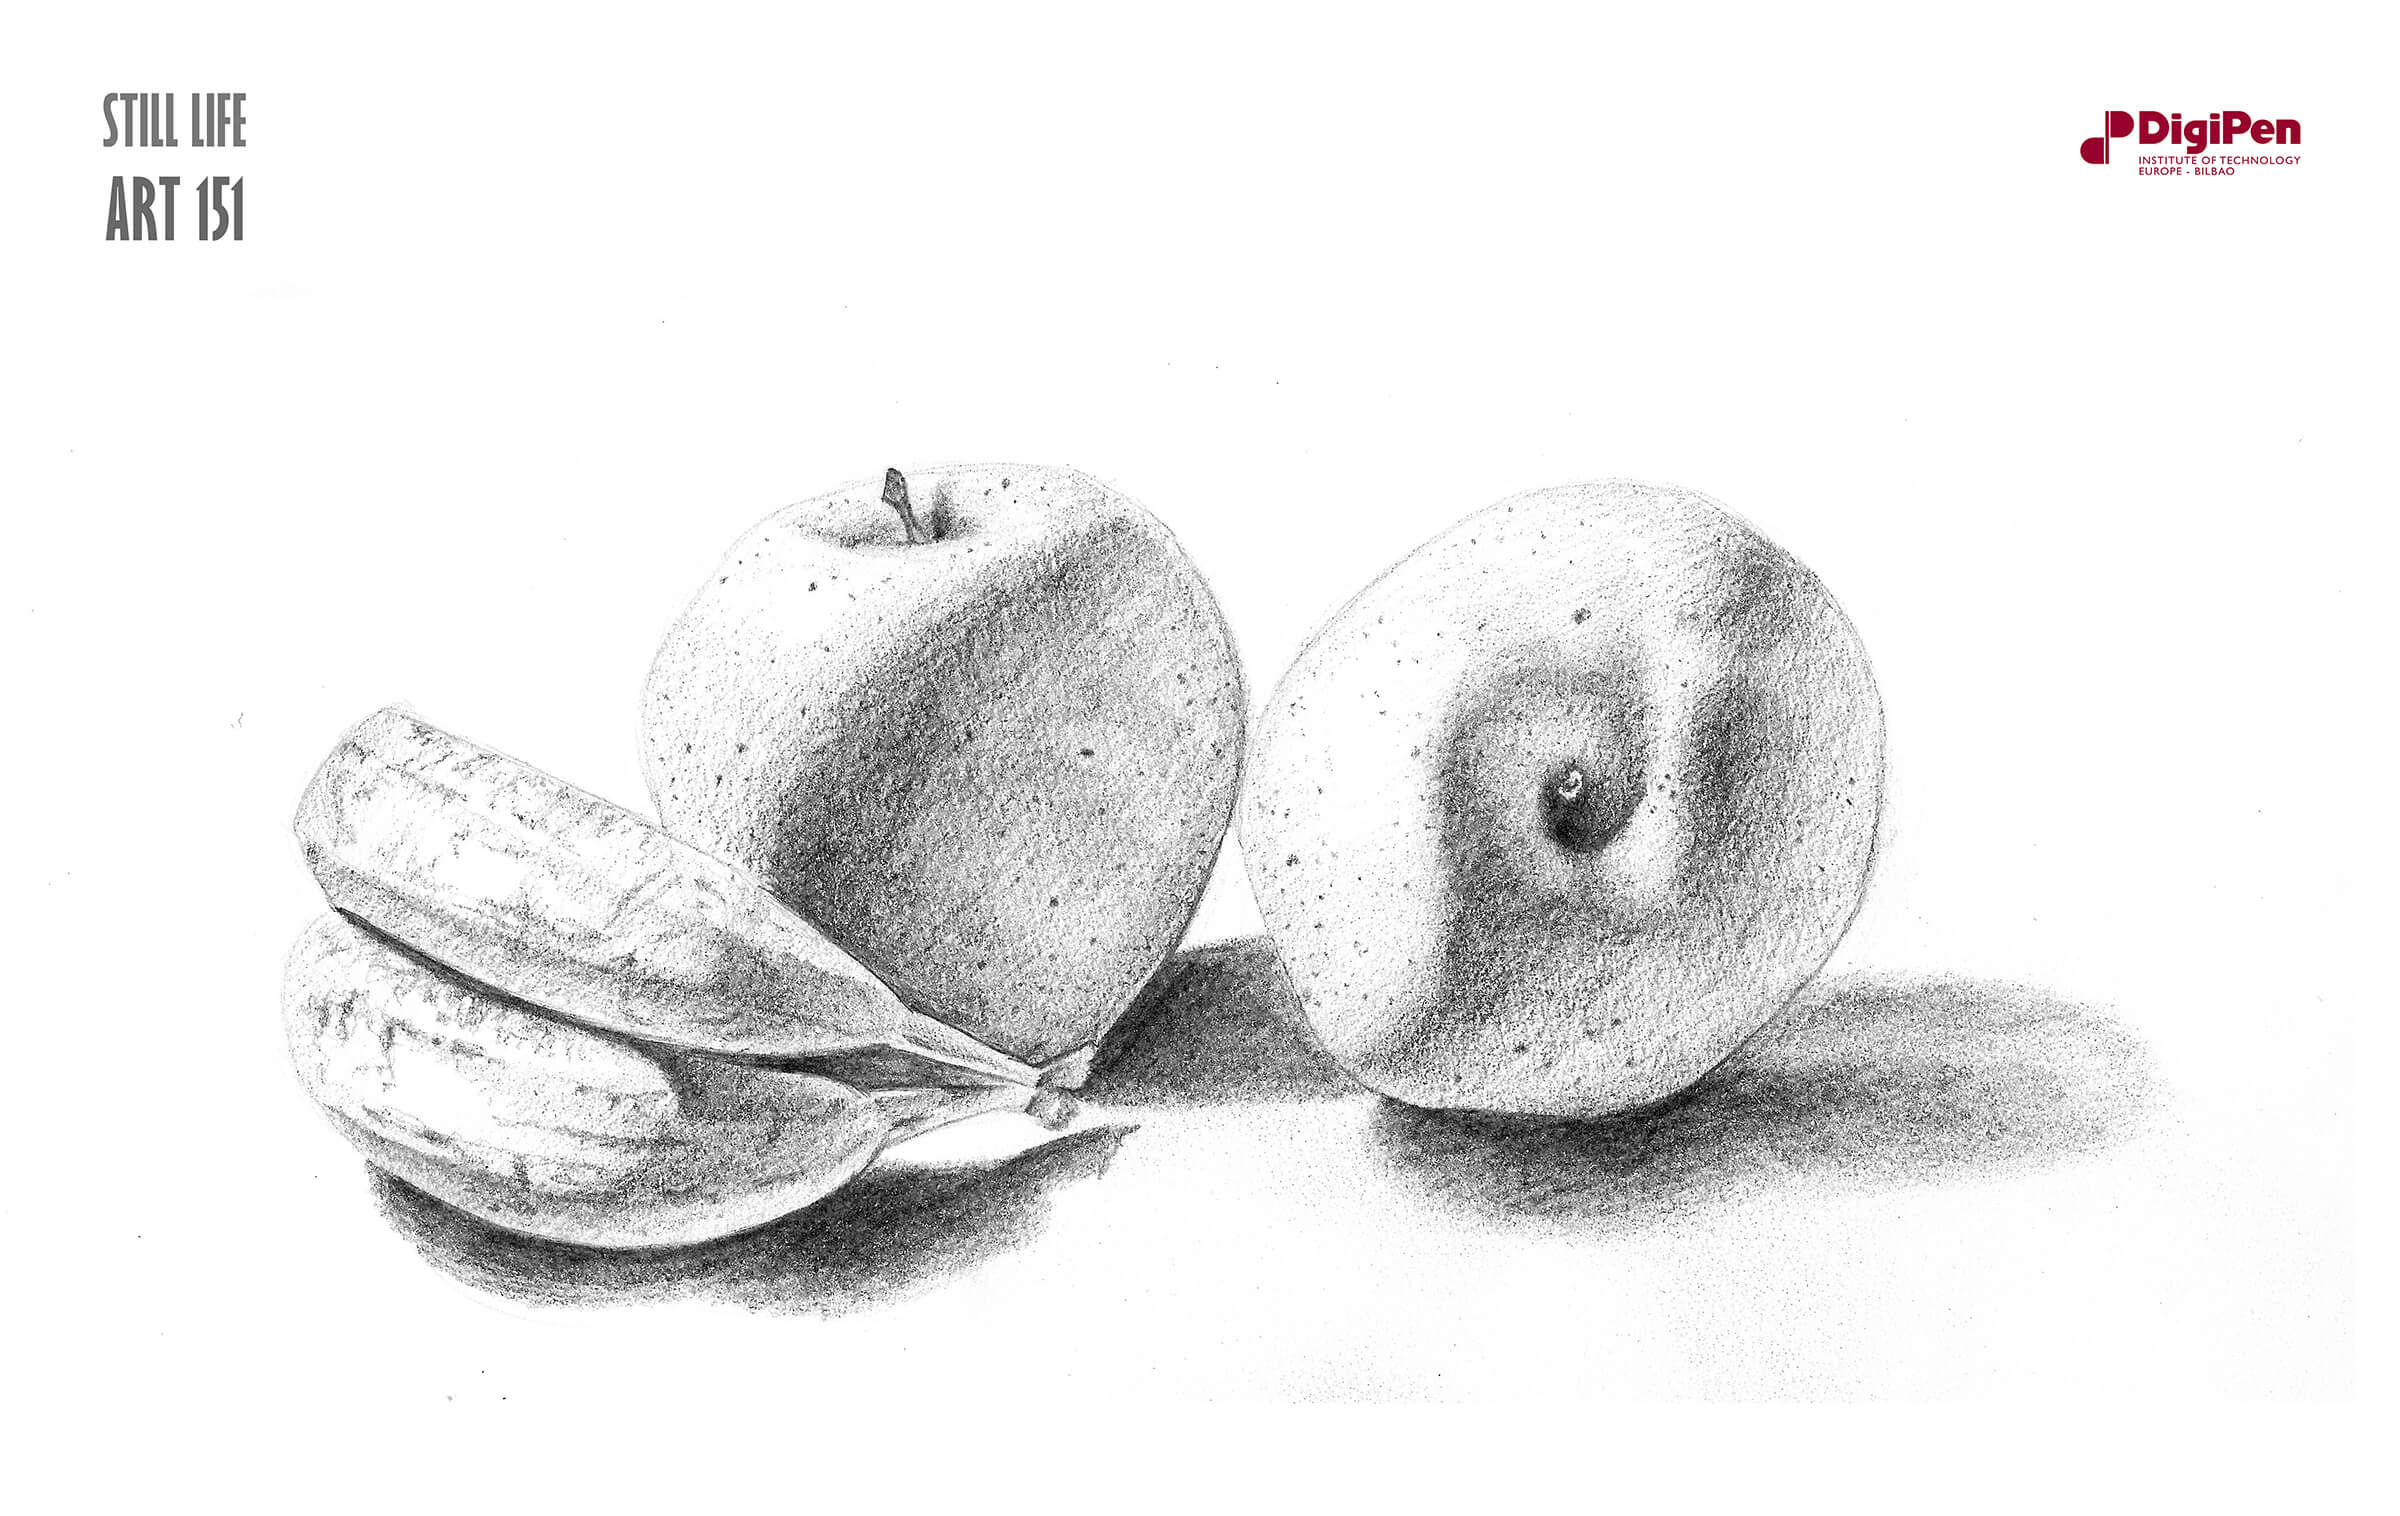 Black-and-white drawing of a pair of bananas turned on its side next to two apples. The fruit is lit from the left.